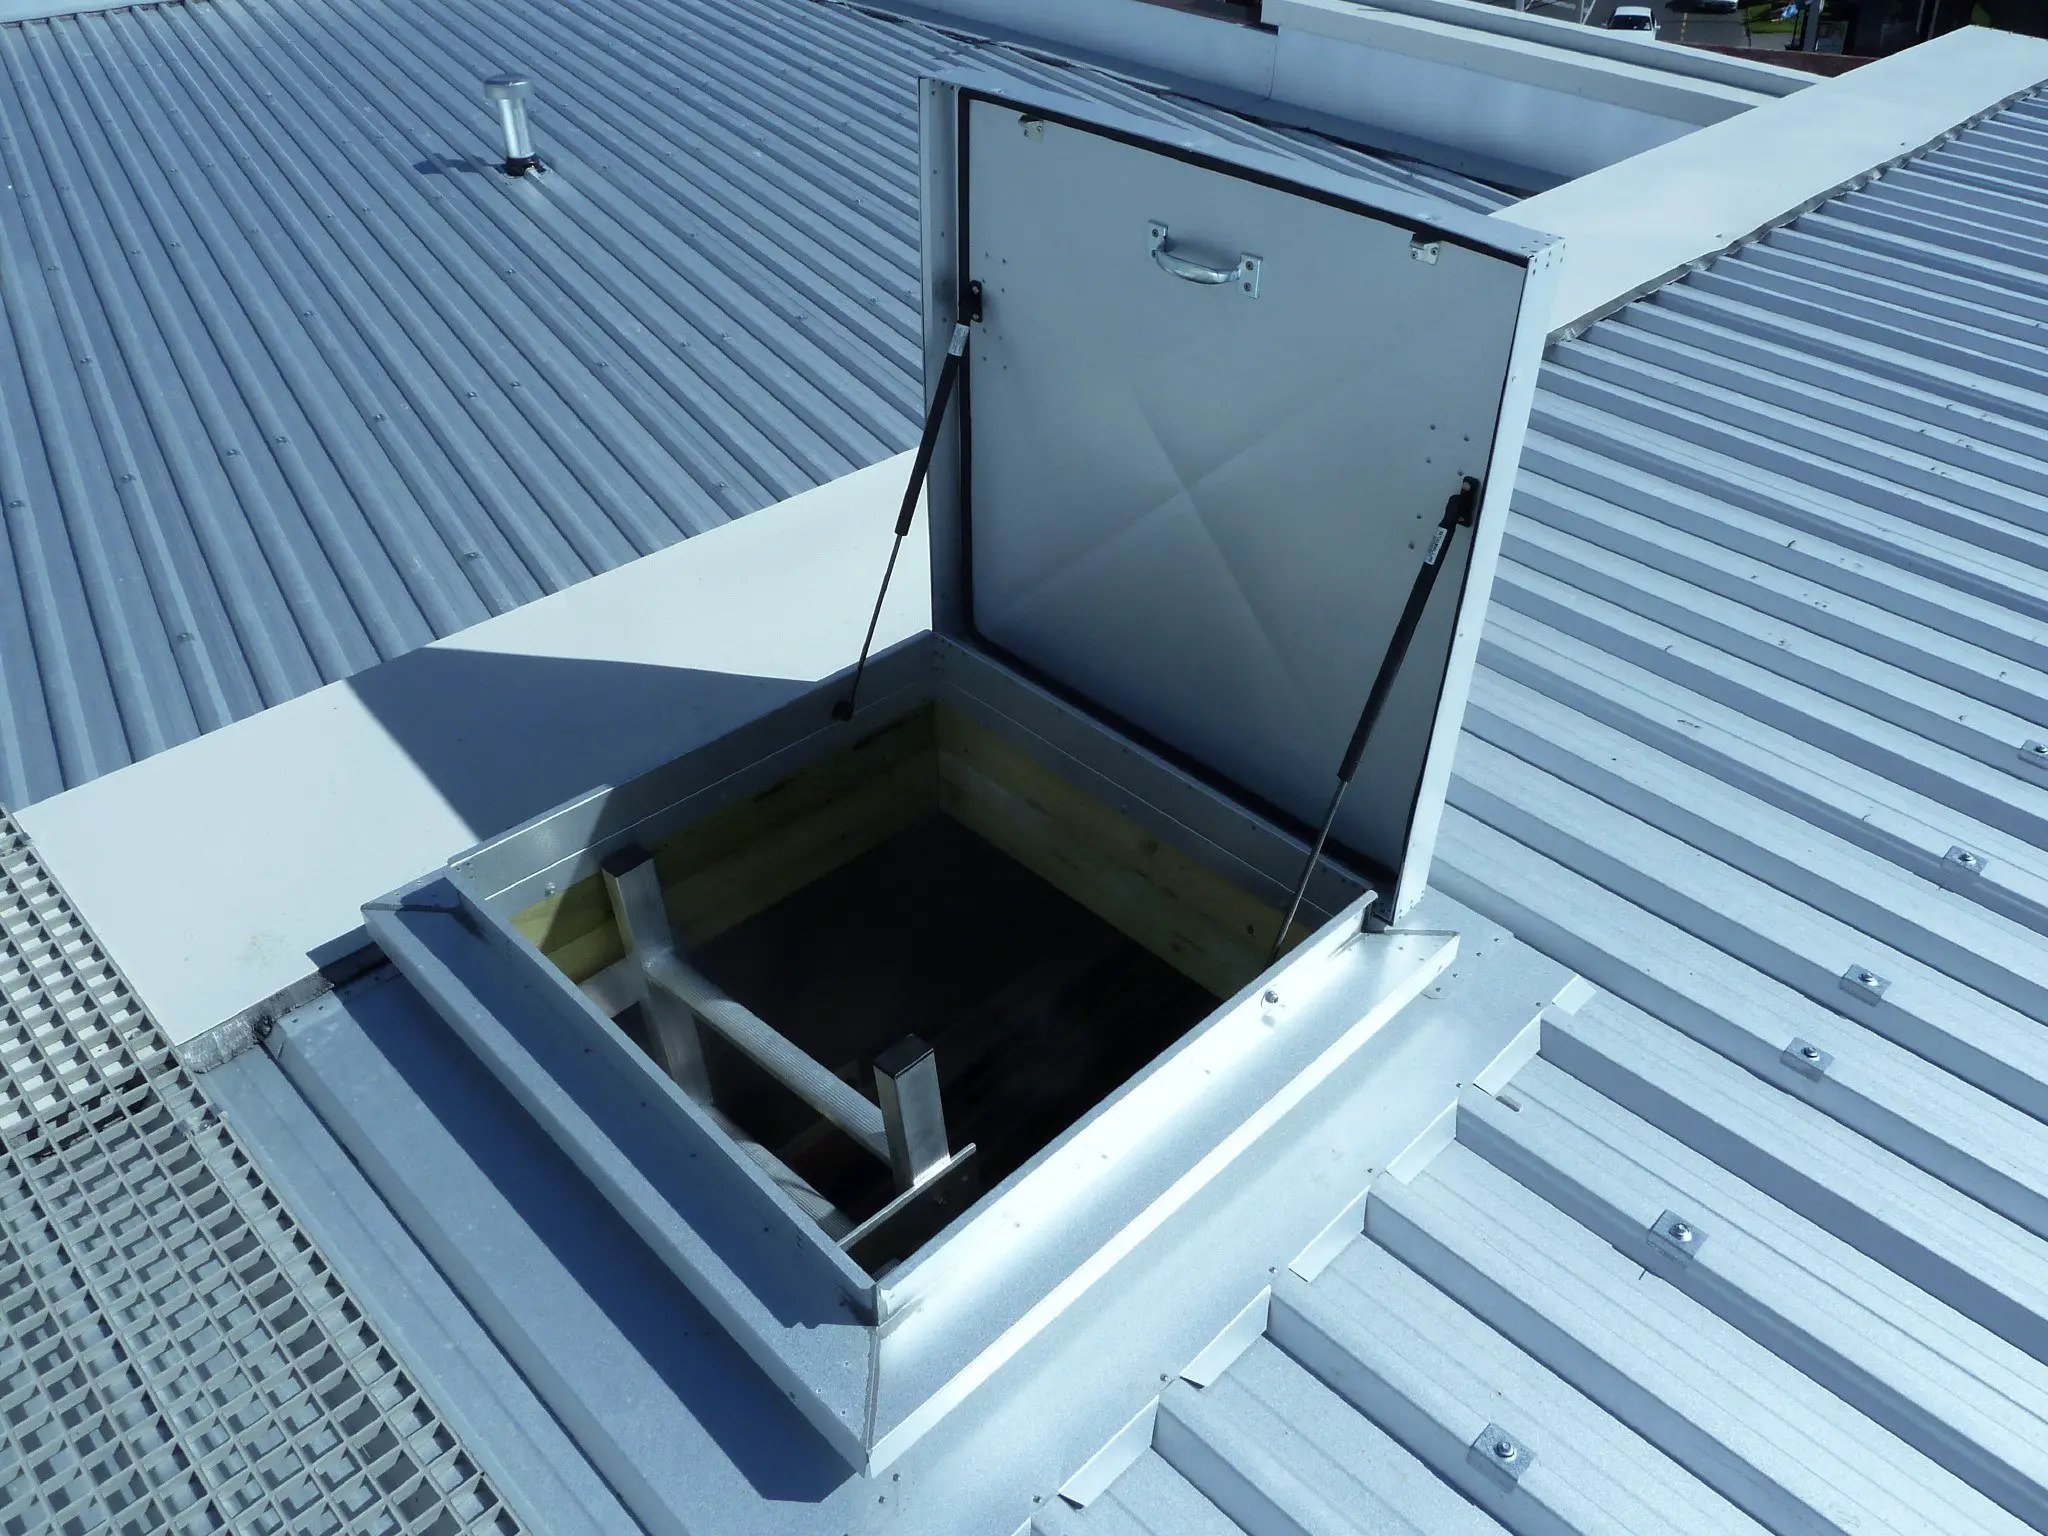 Roof Access Hatches